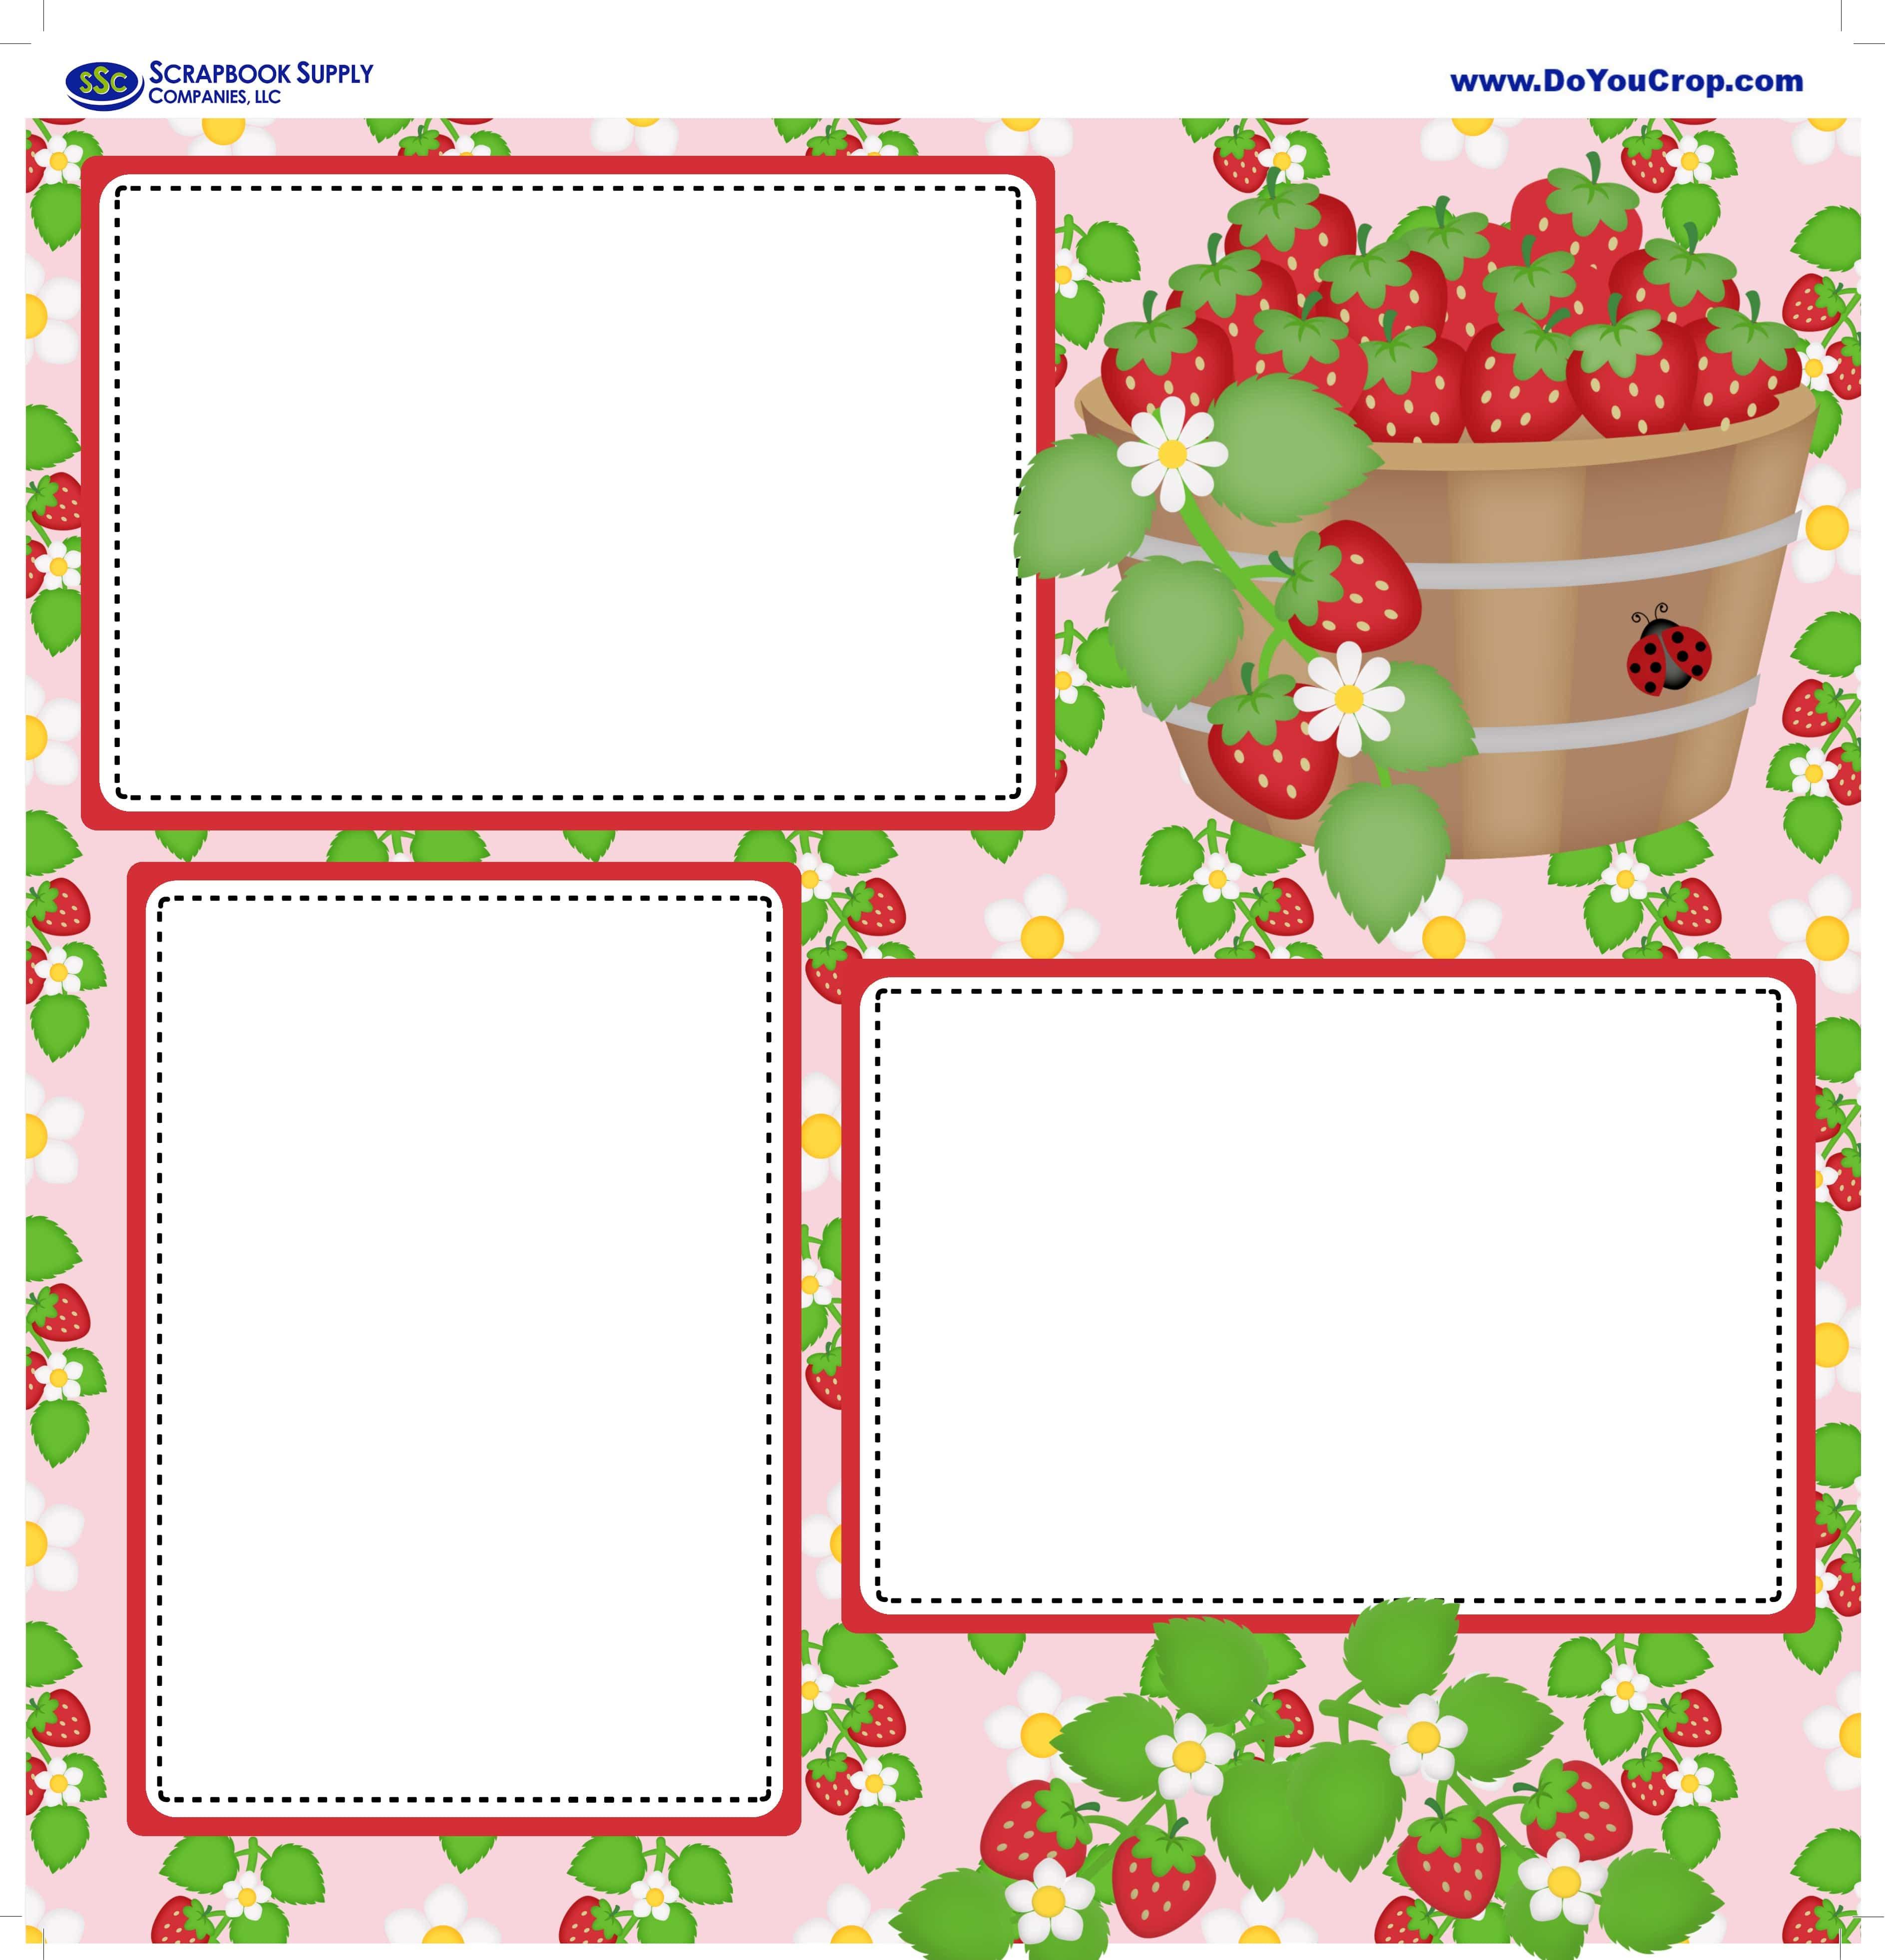 Picking Strawberries (2) - 12 x 12 Premade, Printed Scrapbook Pages by SSC Designs - Scrapbook Supply Companies